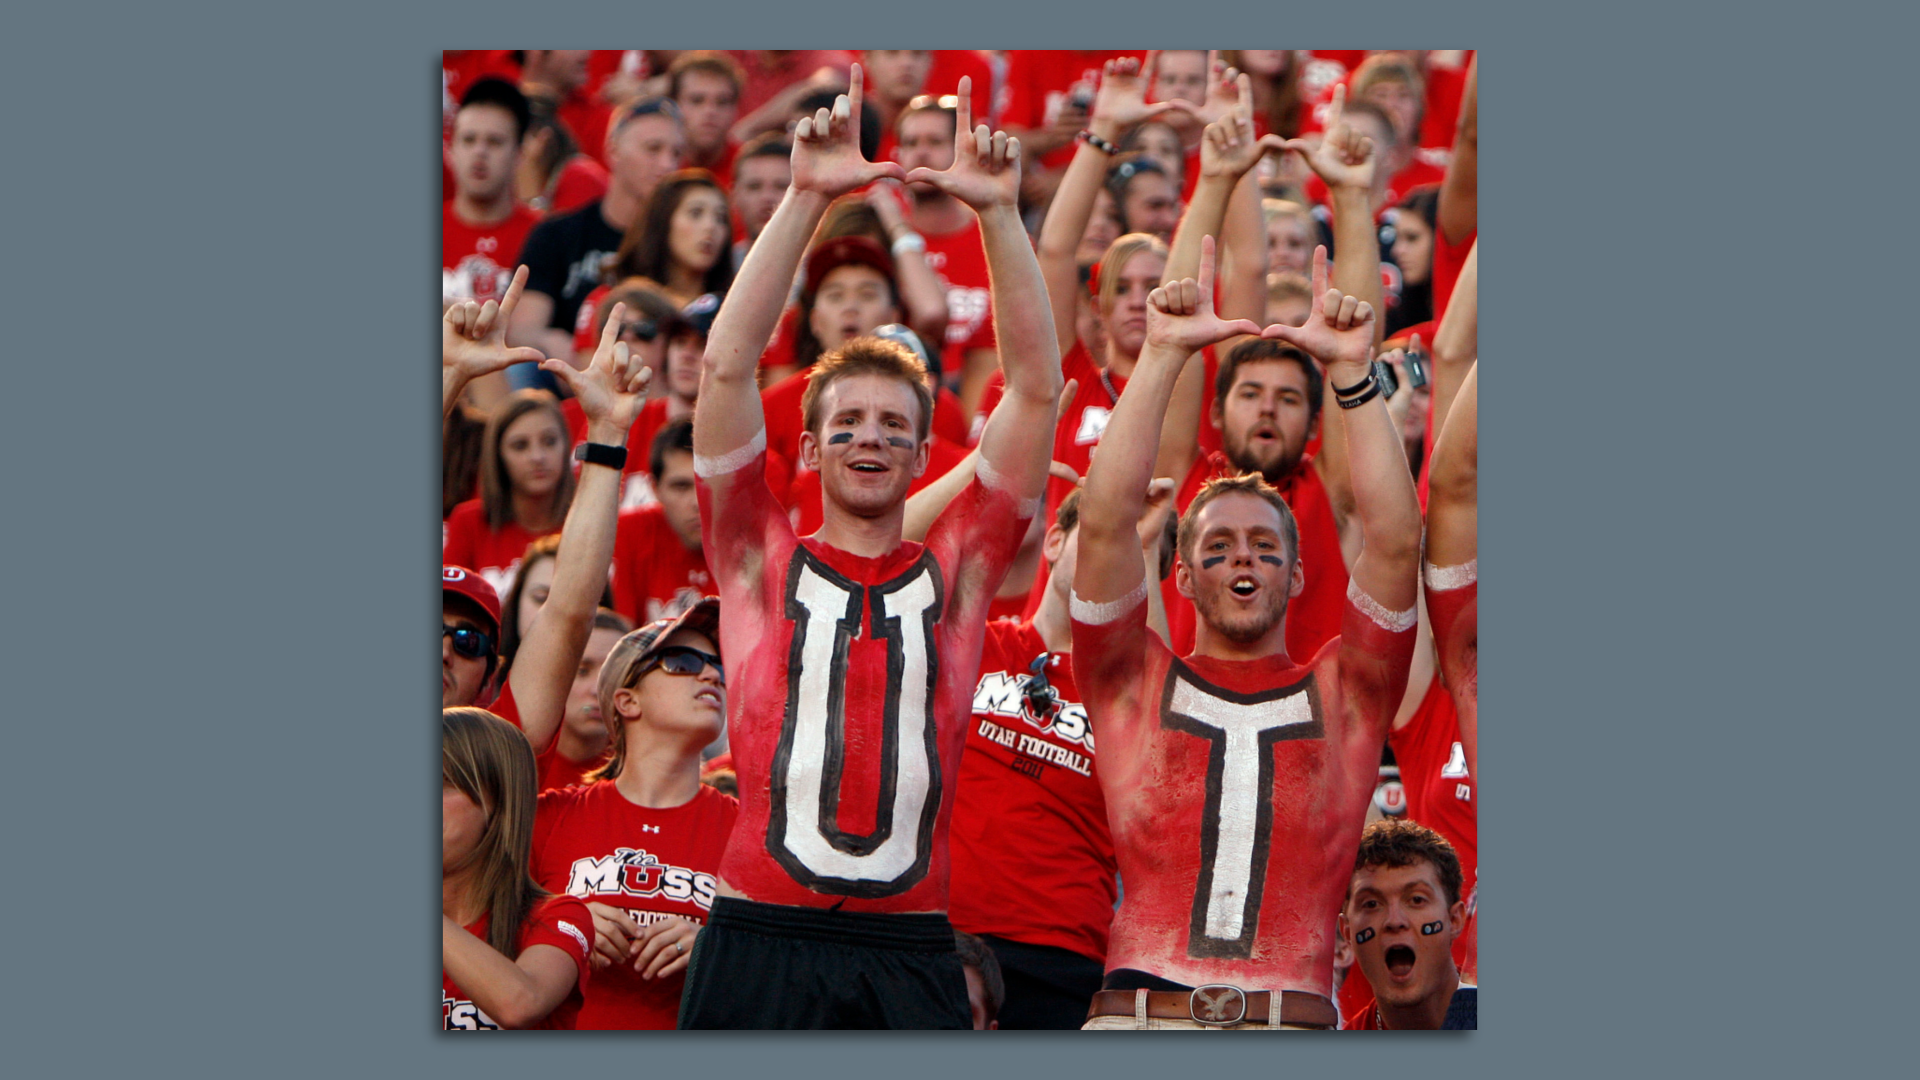 University of Utah fans are topless and have the letters U & T painted on their chests.